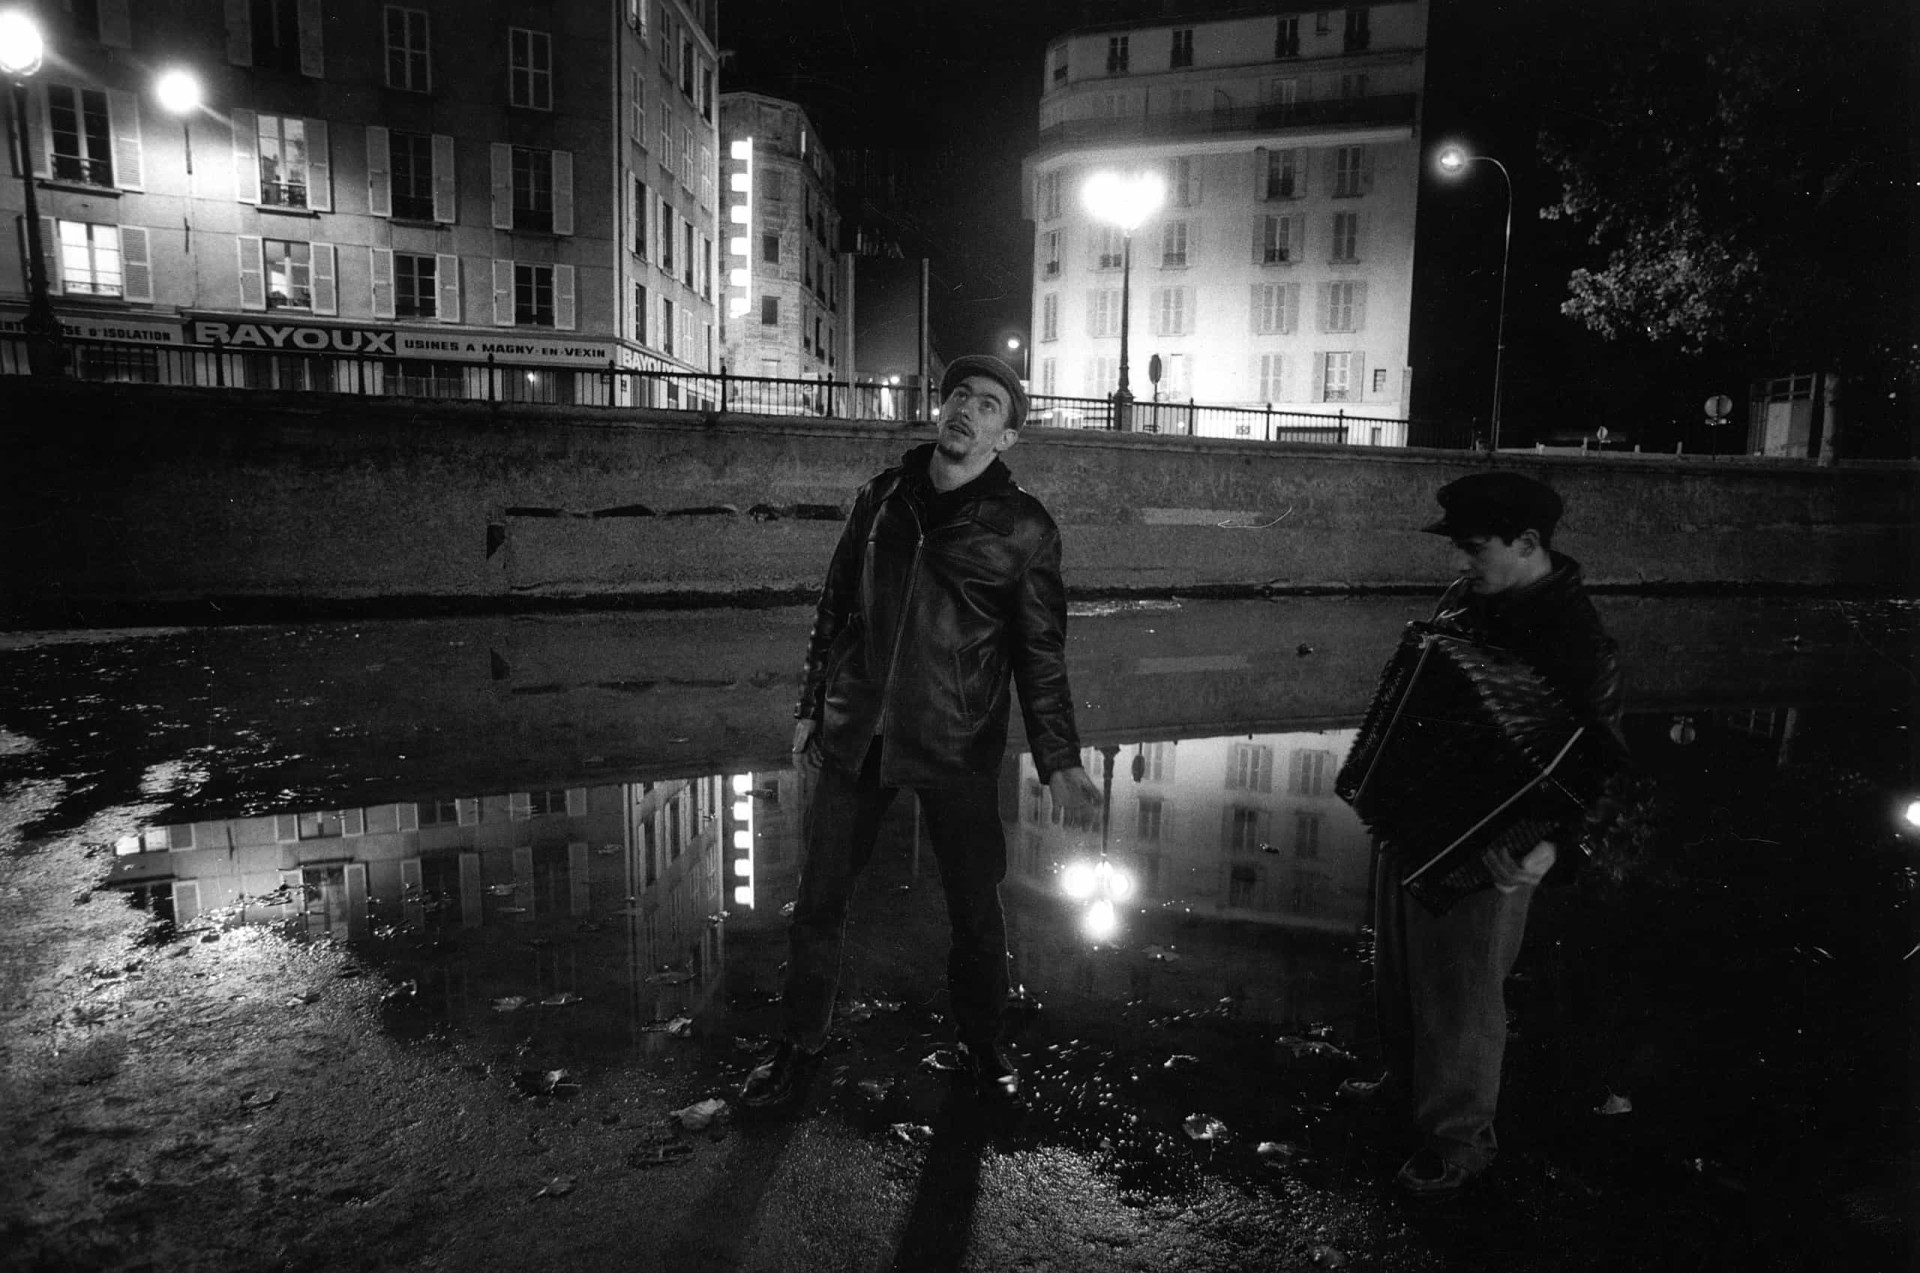 <p>'La Haine' is a staple of French cinema starring Vincent Cassel. It follows three young men in Paris on the day after a large protest. This dark depiction of the city will keep you on the edge of your seat.</p><p><a href="https://www.msn.com/en-us/community/channel/vid-7xx8mnucu55yw63we9va2gwr7uihbxwc68fxqp25x6tg4ftibpra?cvid=94631541bc0f4f89bfd59158d696ad7e">Follow us and access great exclusive content every day</a></p>